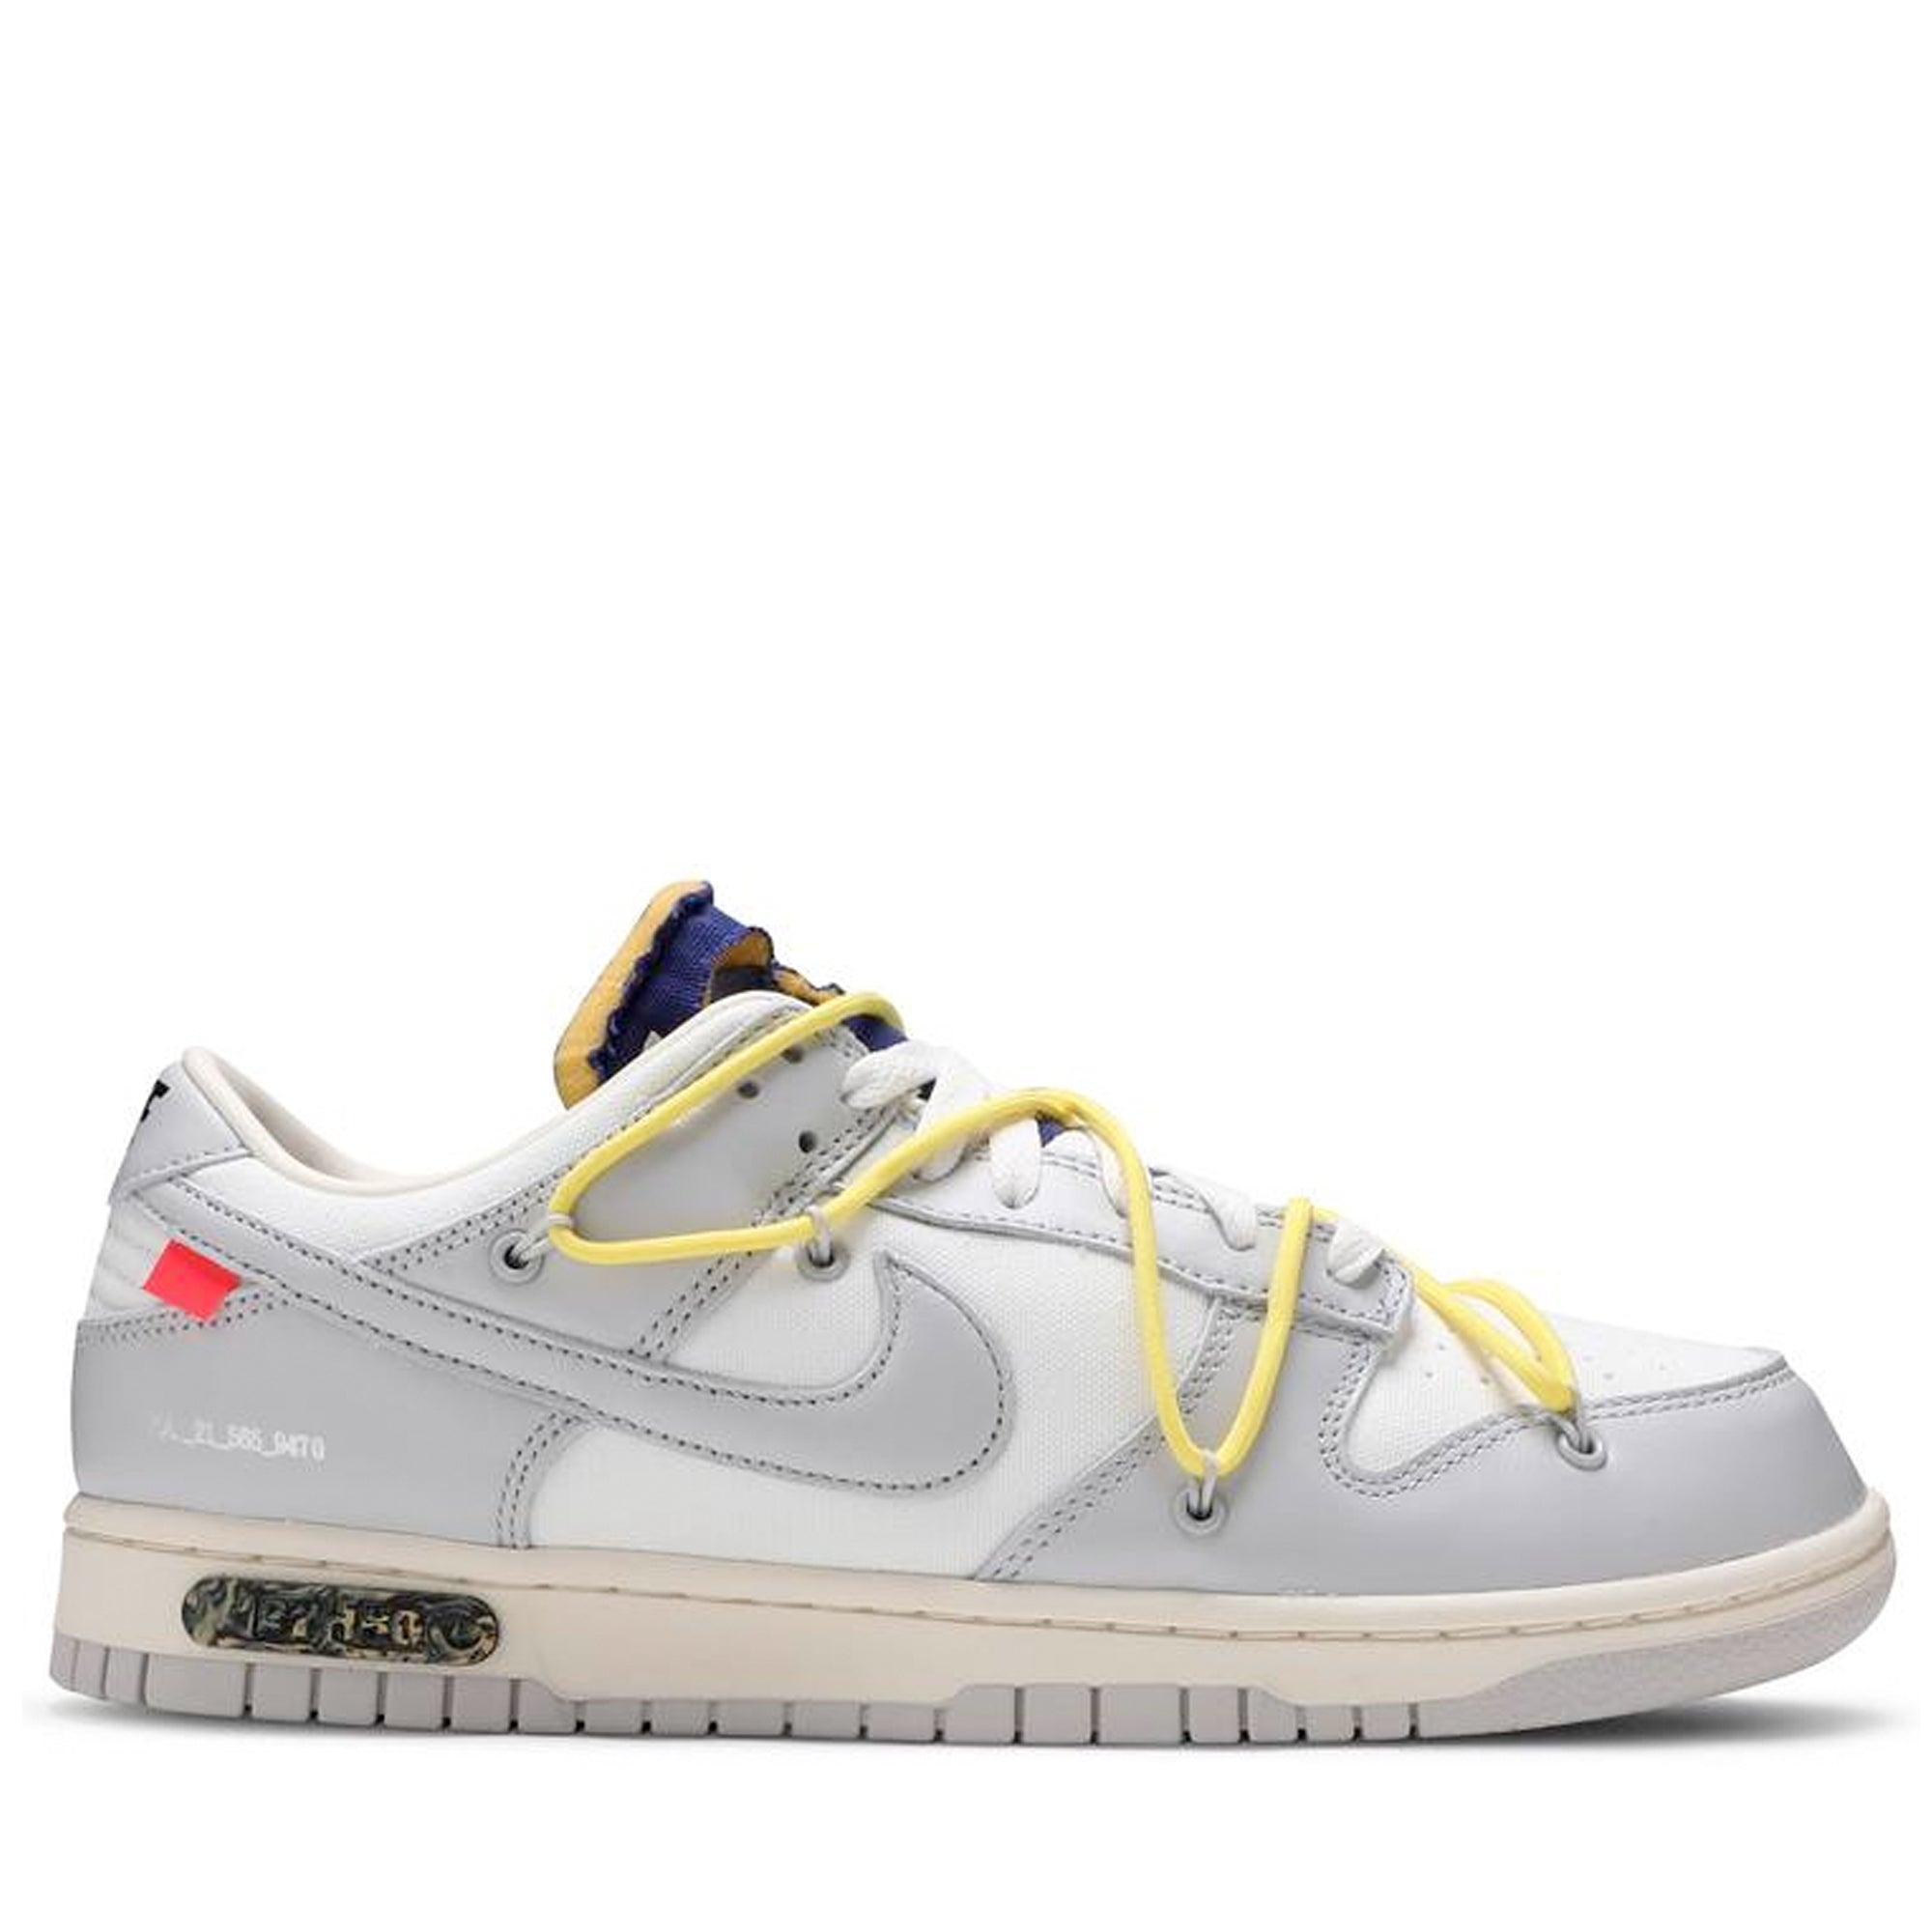 Shop Nike Dunks Sneakers in Canada | Authenticity Guaranteed